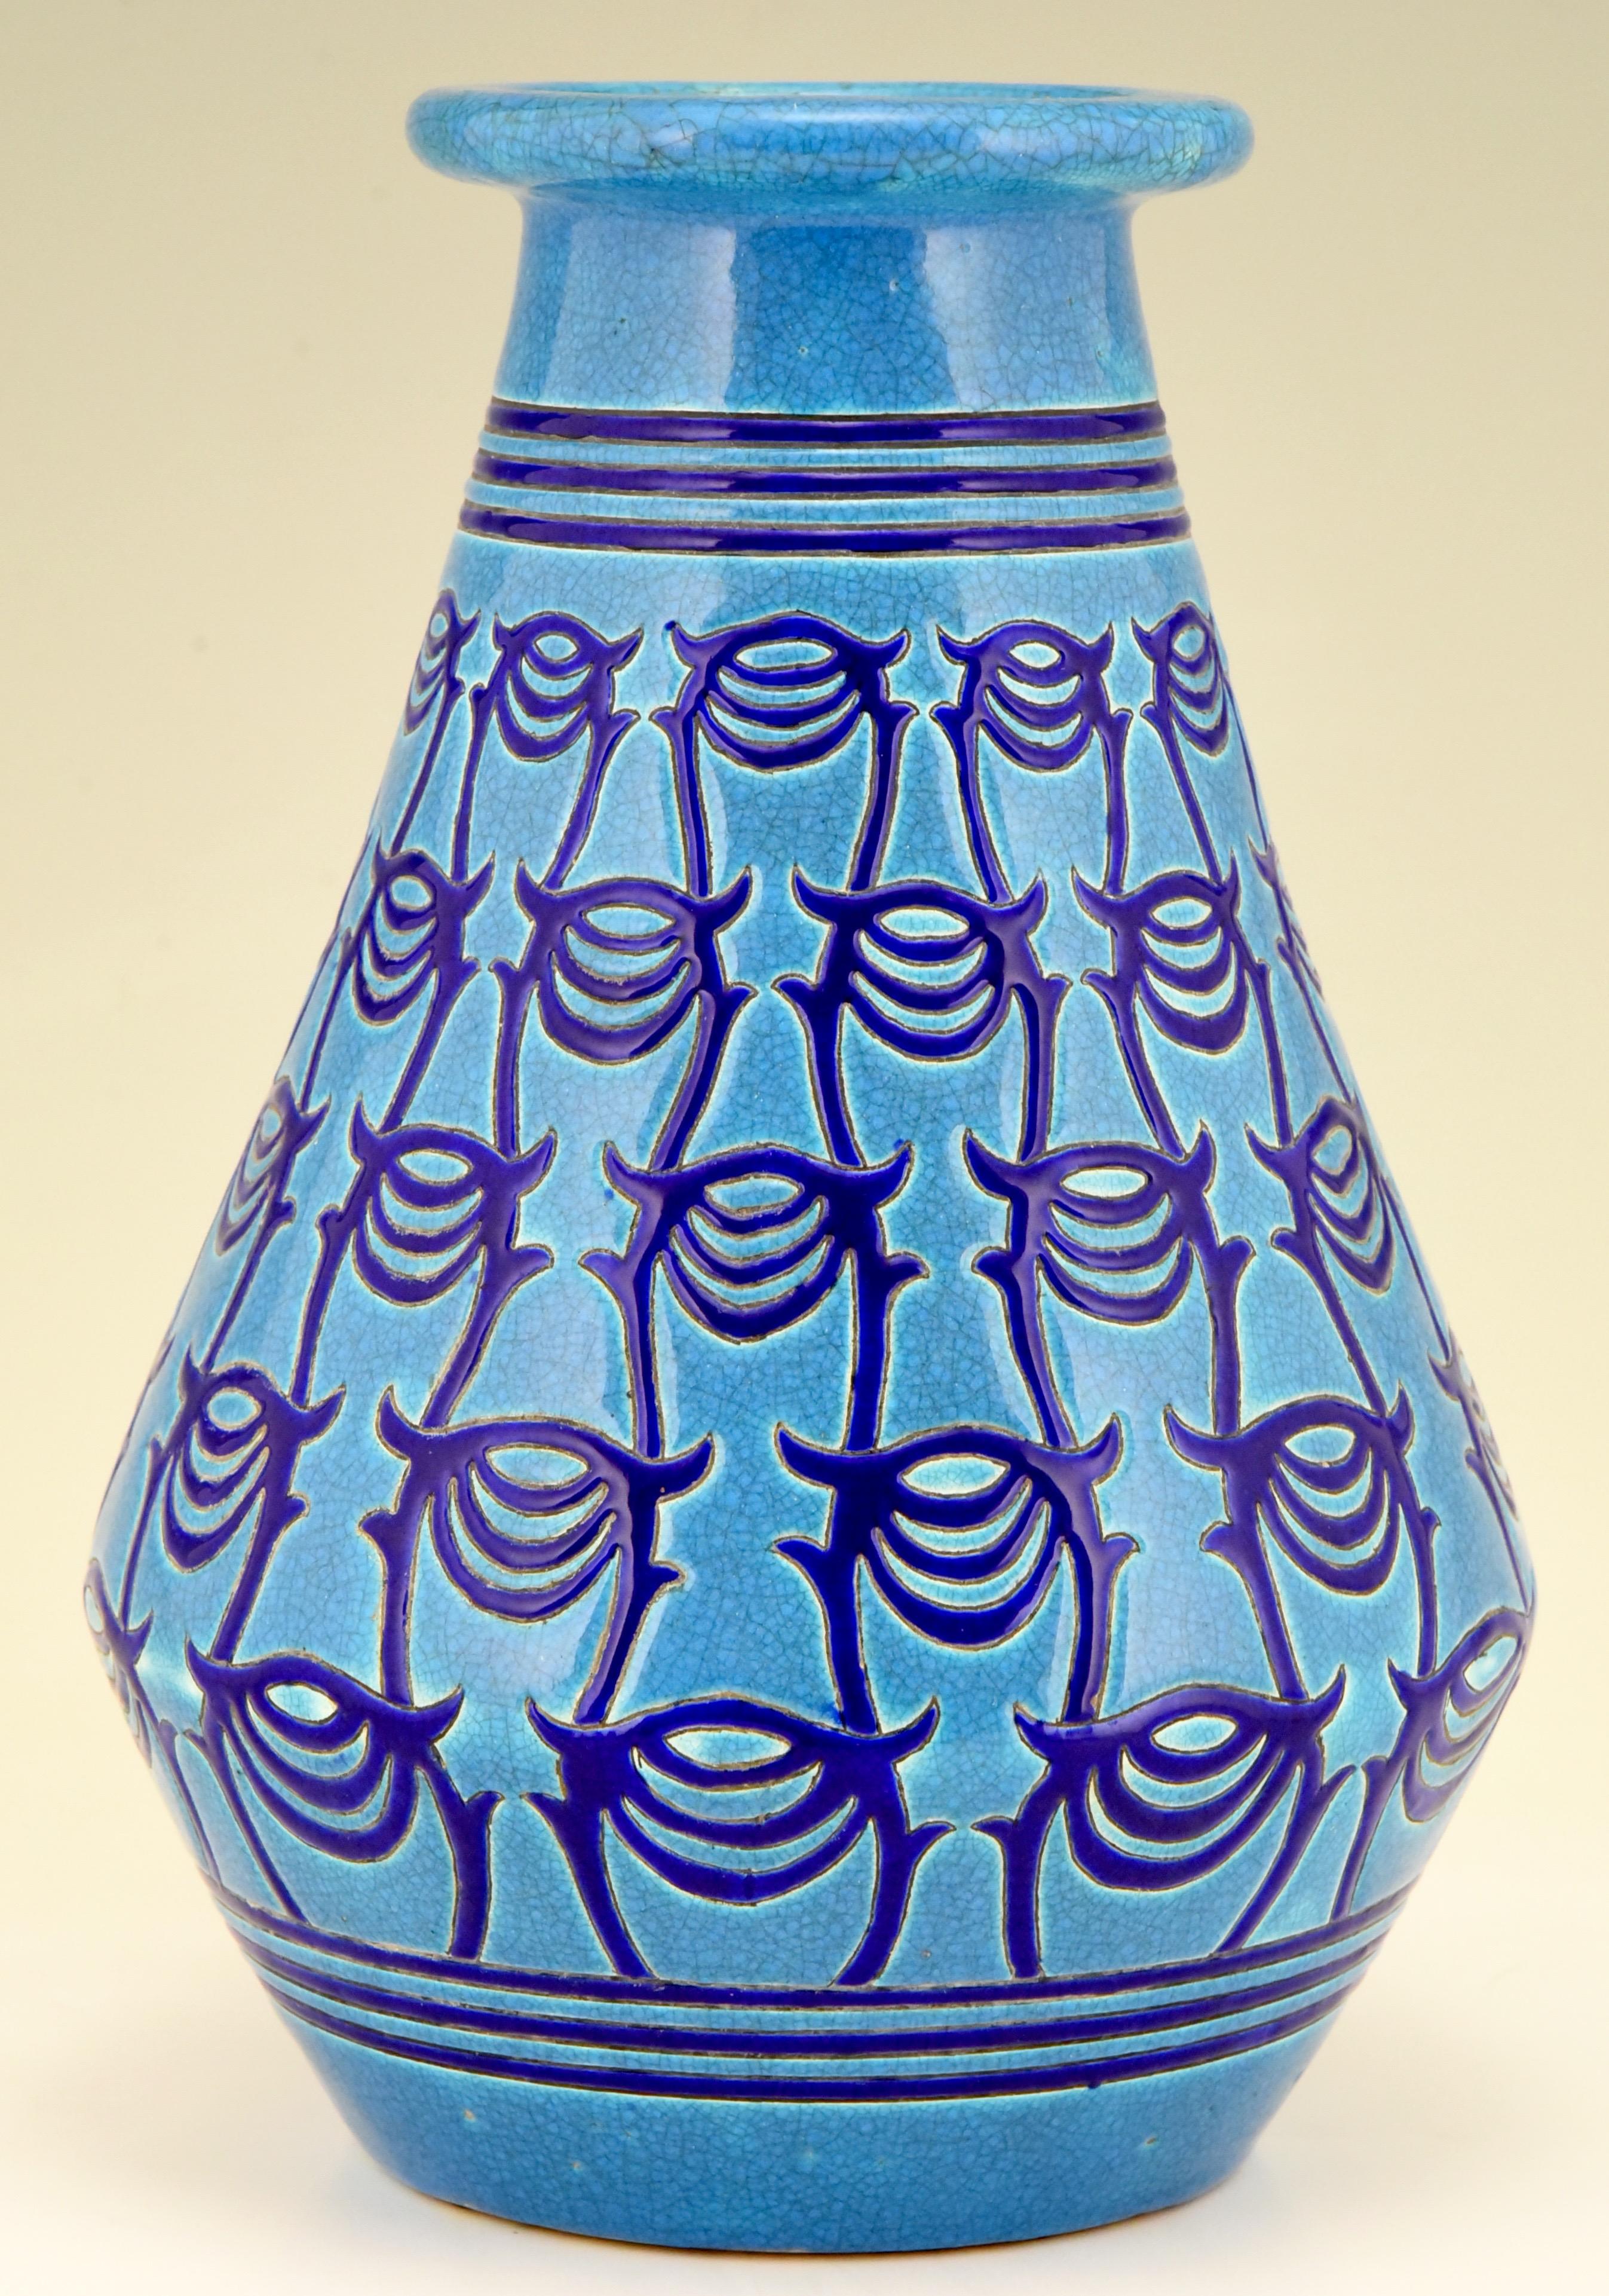 Longwy Primavera Art Deco ceramic vase in turquoise blue with dark blue pattern. France 1925. 
This French Art Deco vase was made by Longwy for Atelier Primavera, the design studio of the Paris department store “Les Grands Magasins du